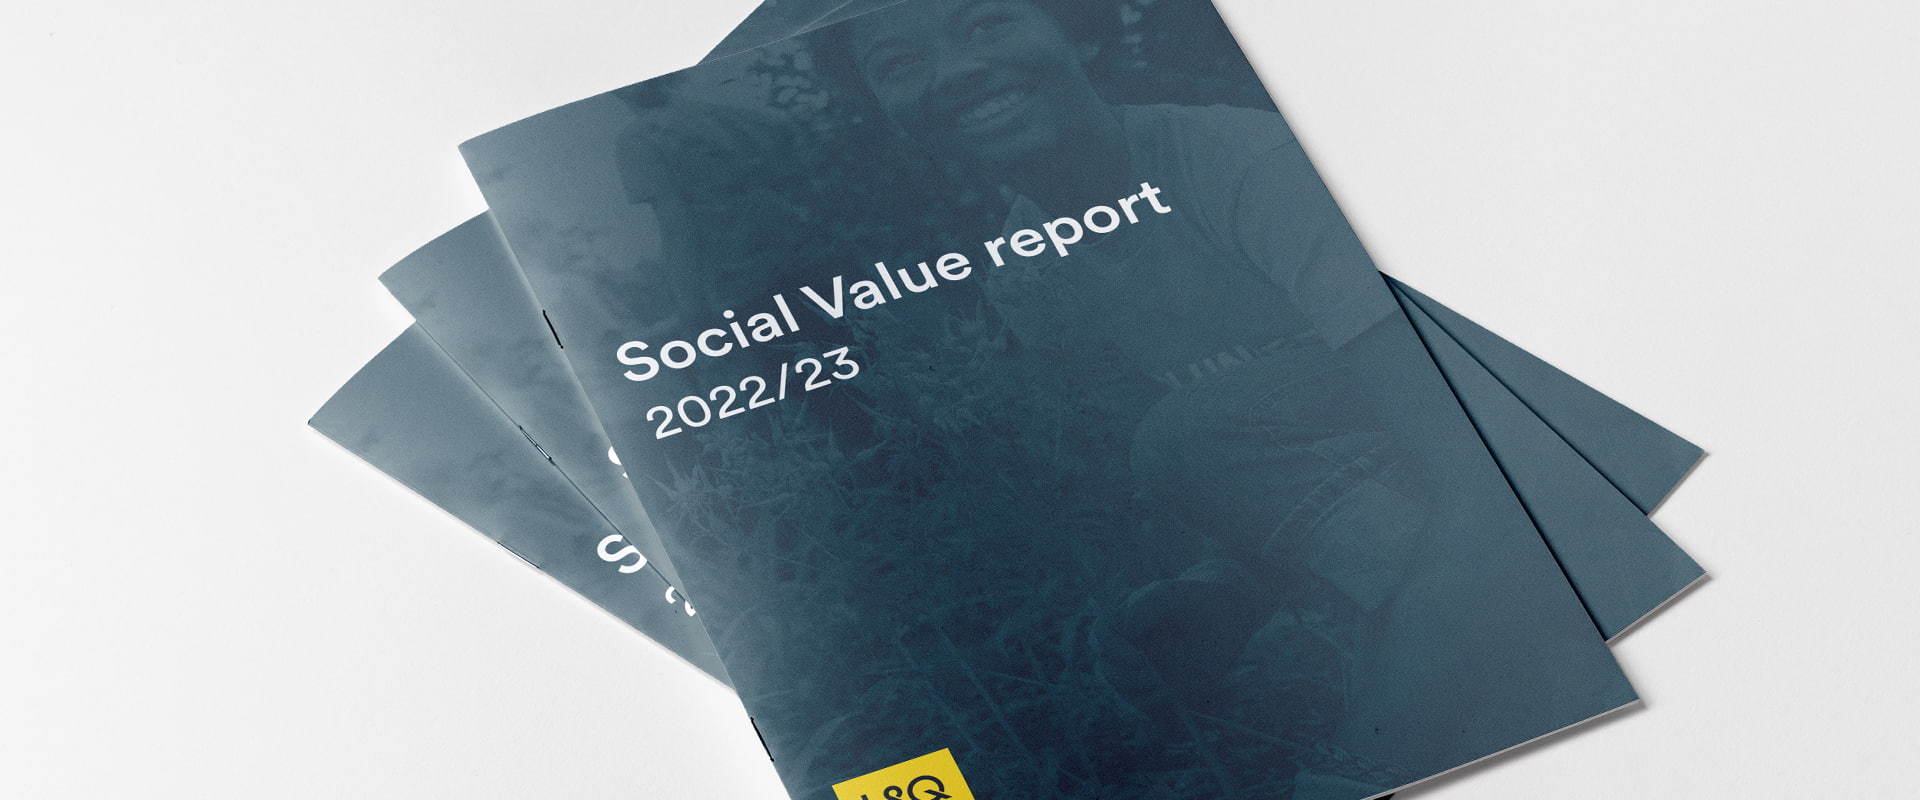 The front cover of L&Q's social value report